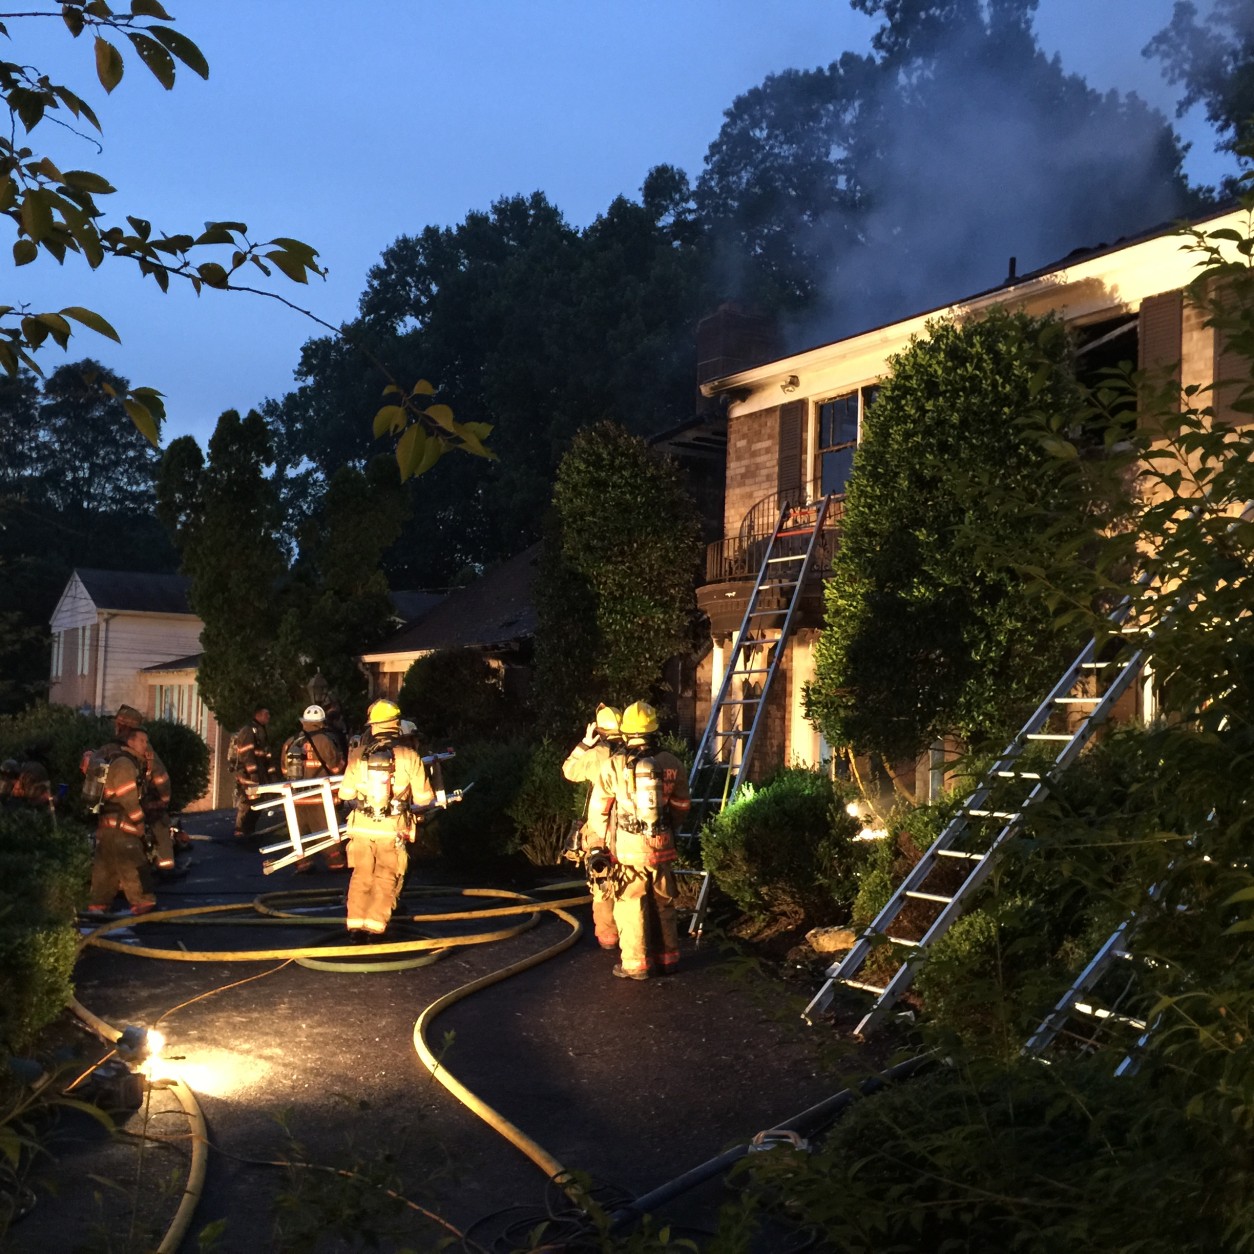 About 7 firefighters responded, Montgomery County Fire and Rescue officials say. (WTOP/Kristi King)